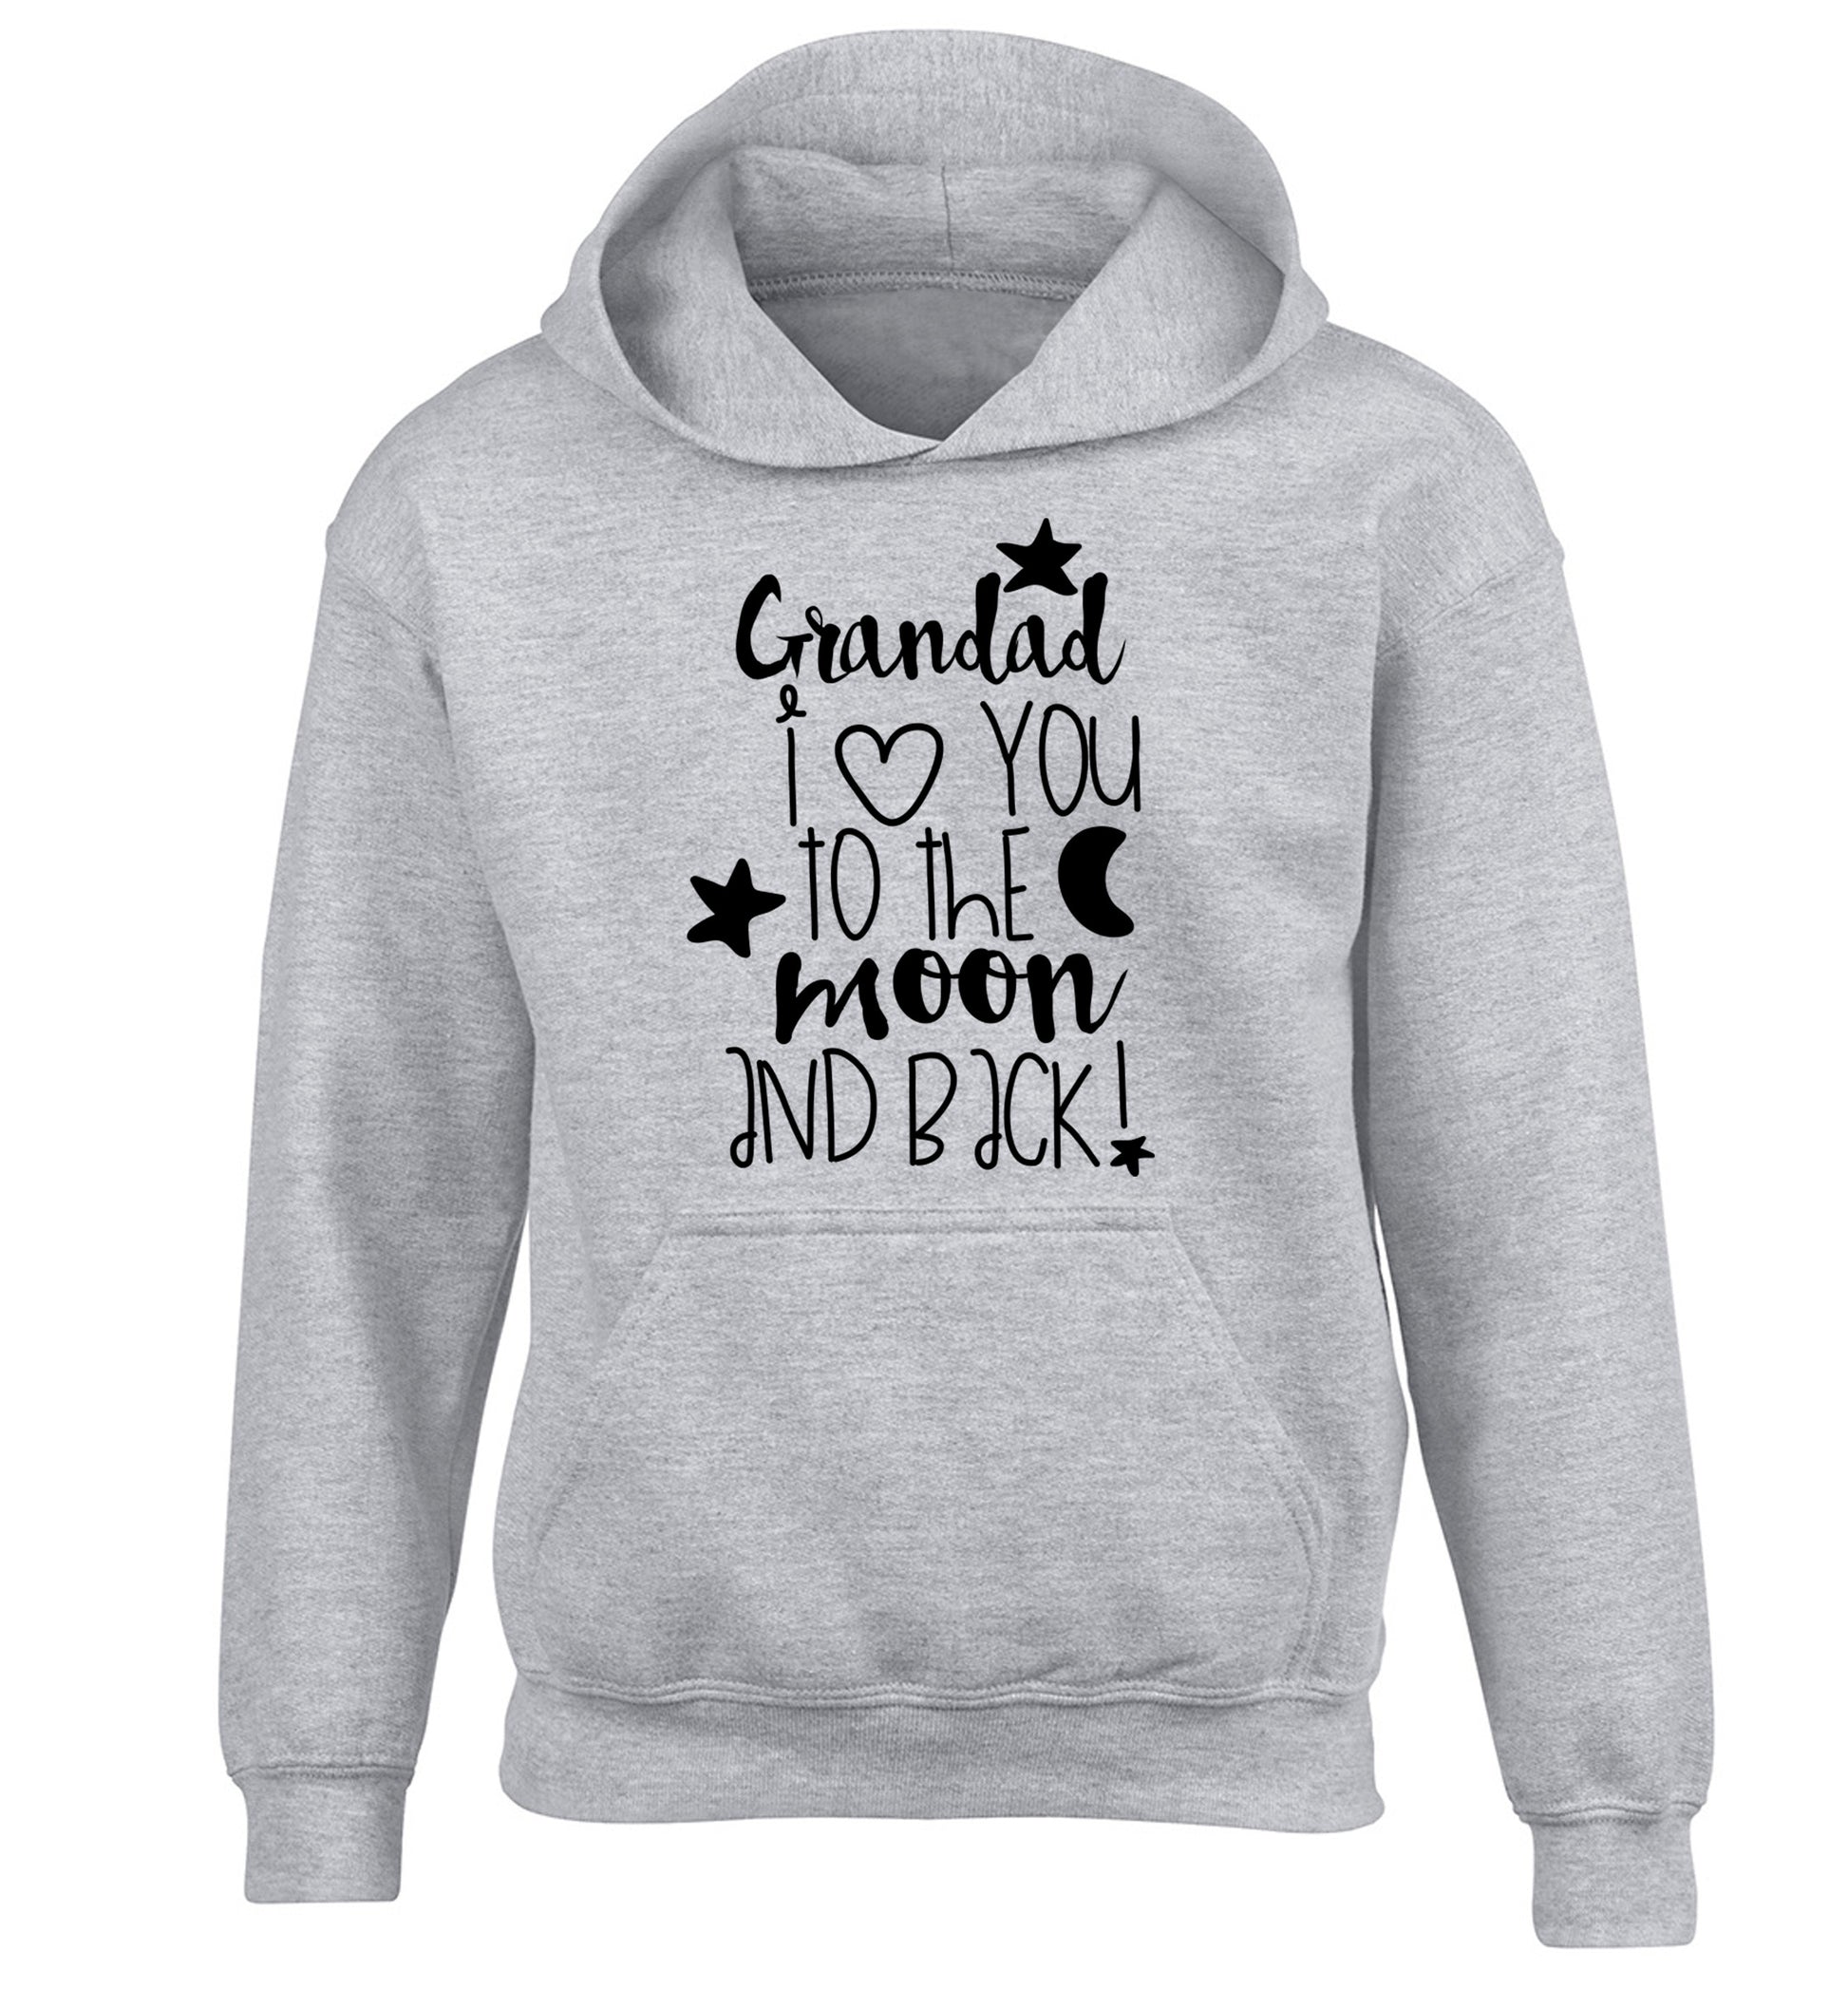 Grandad's I love you to the moon and back children's grey hoodie 12-14 Years